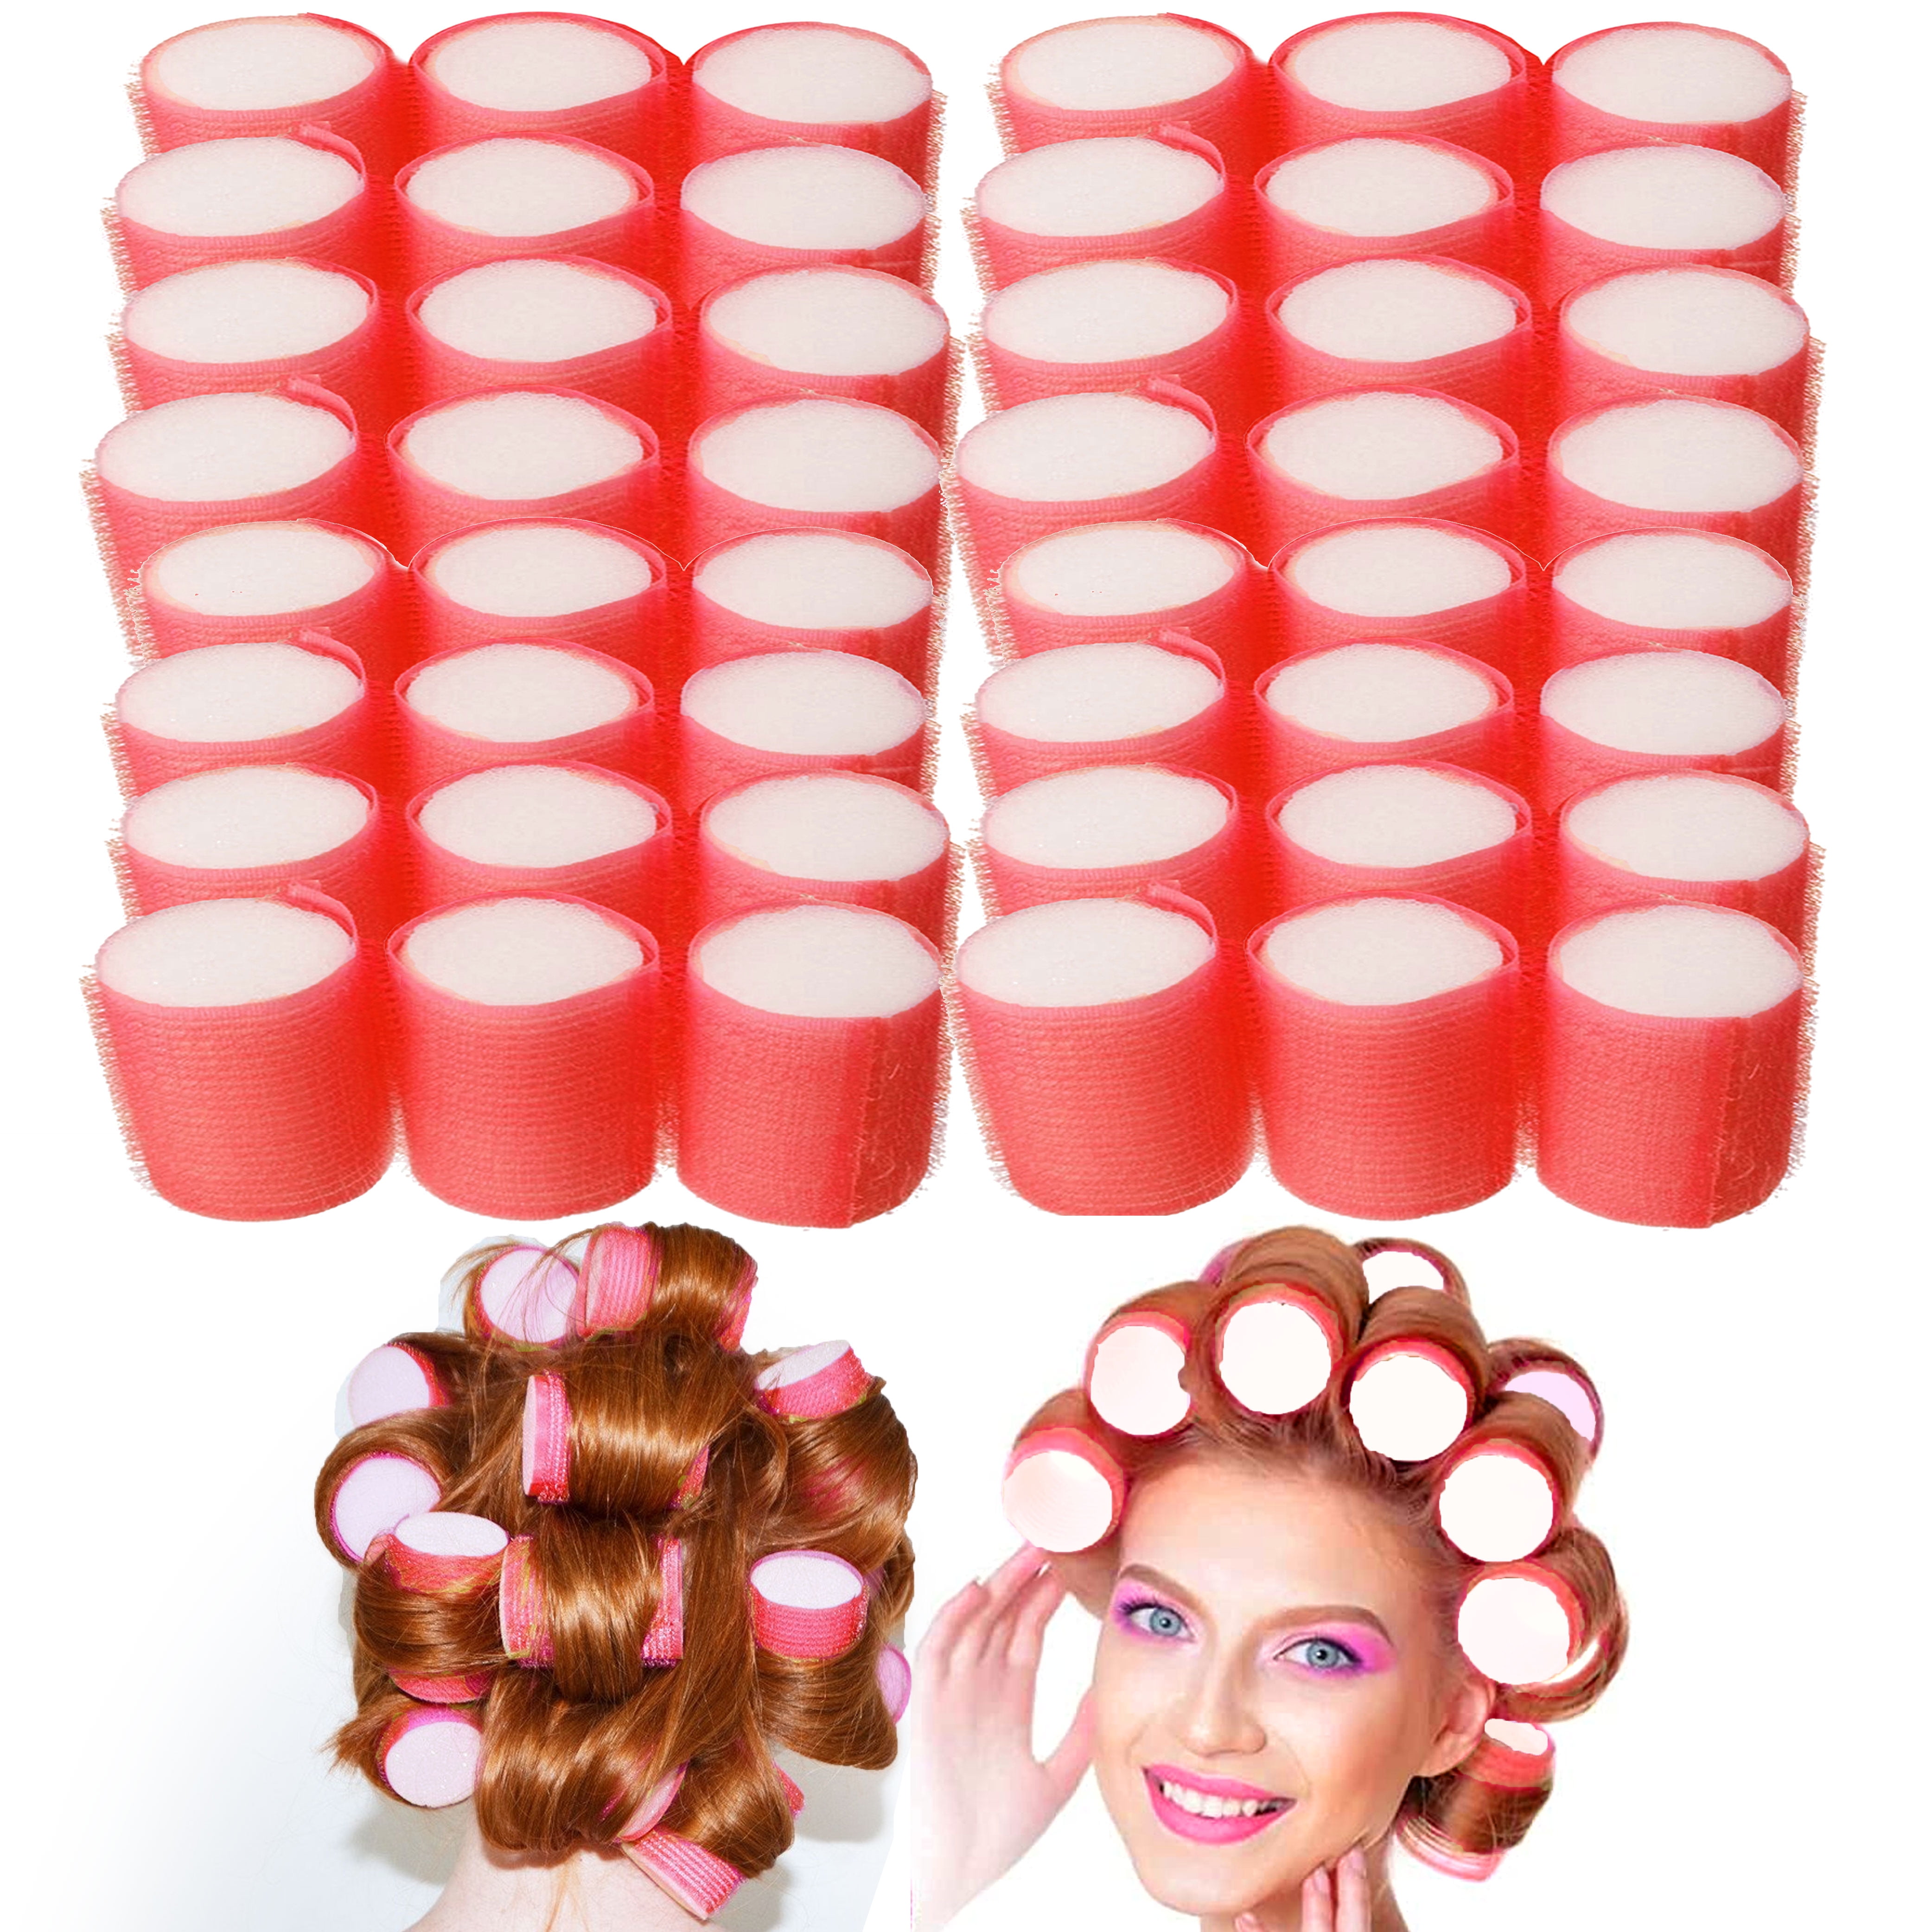 Hair FX Foam Rollers Large 35mm x 12pc